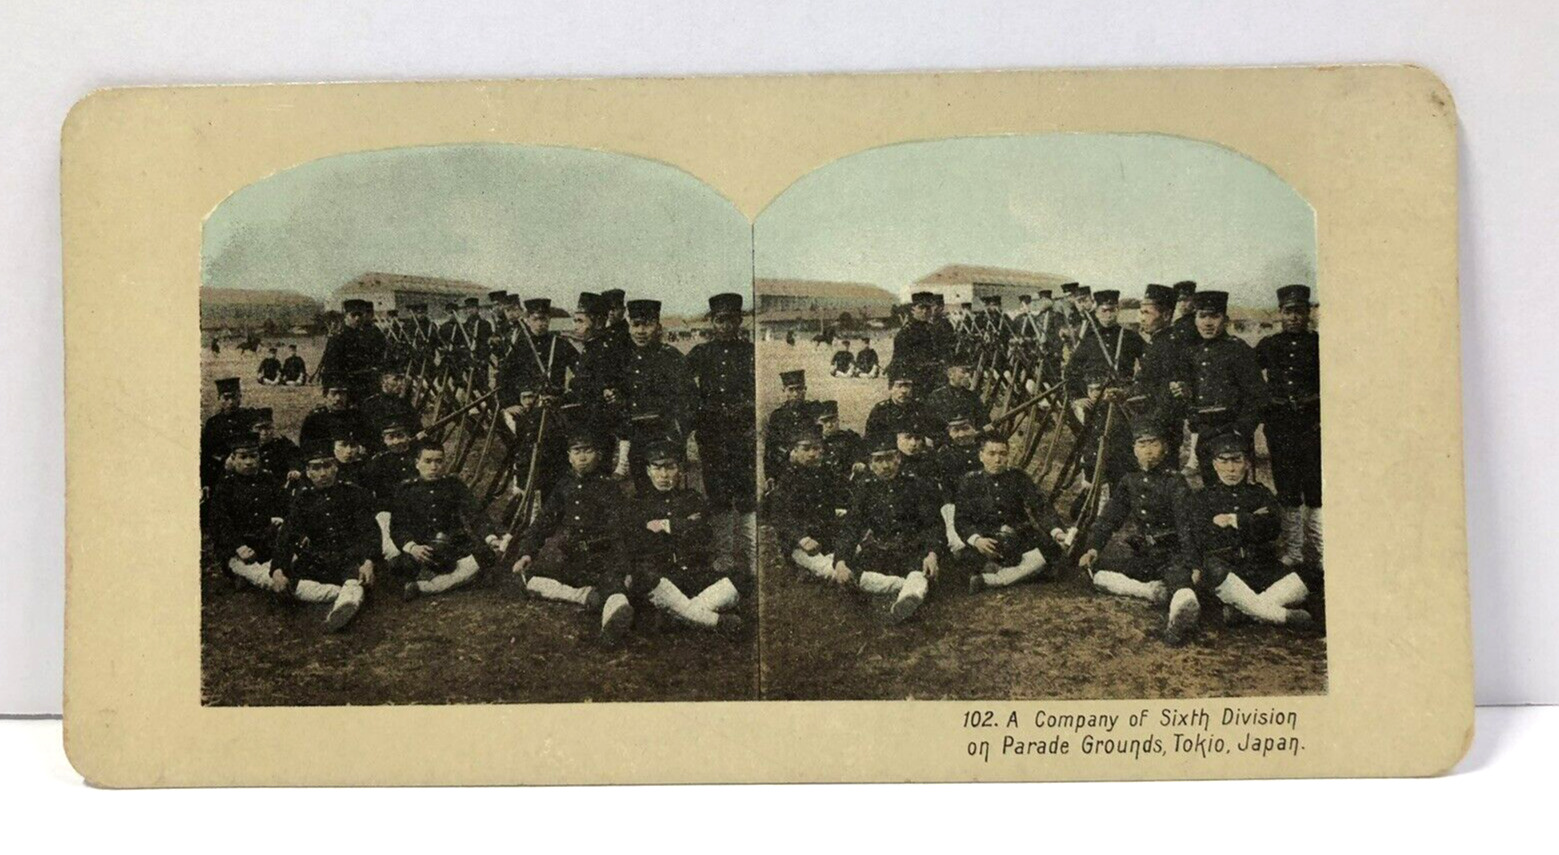 1905 Russo Japanese War Colorized Stereoview- Japanese Soldiers on Parade Ground